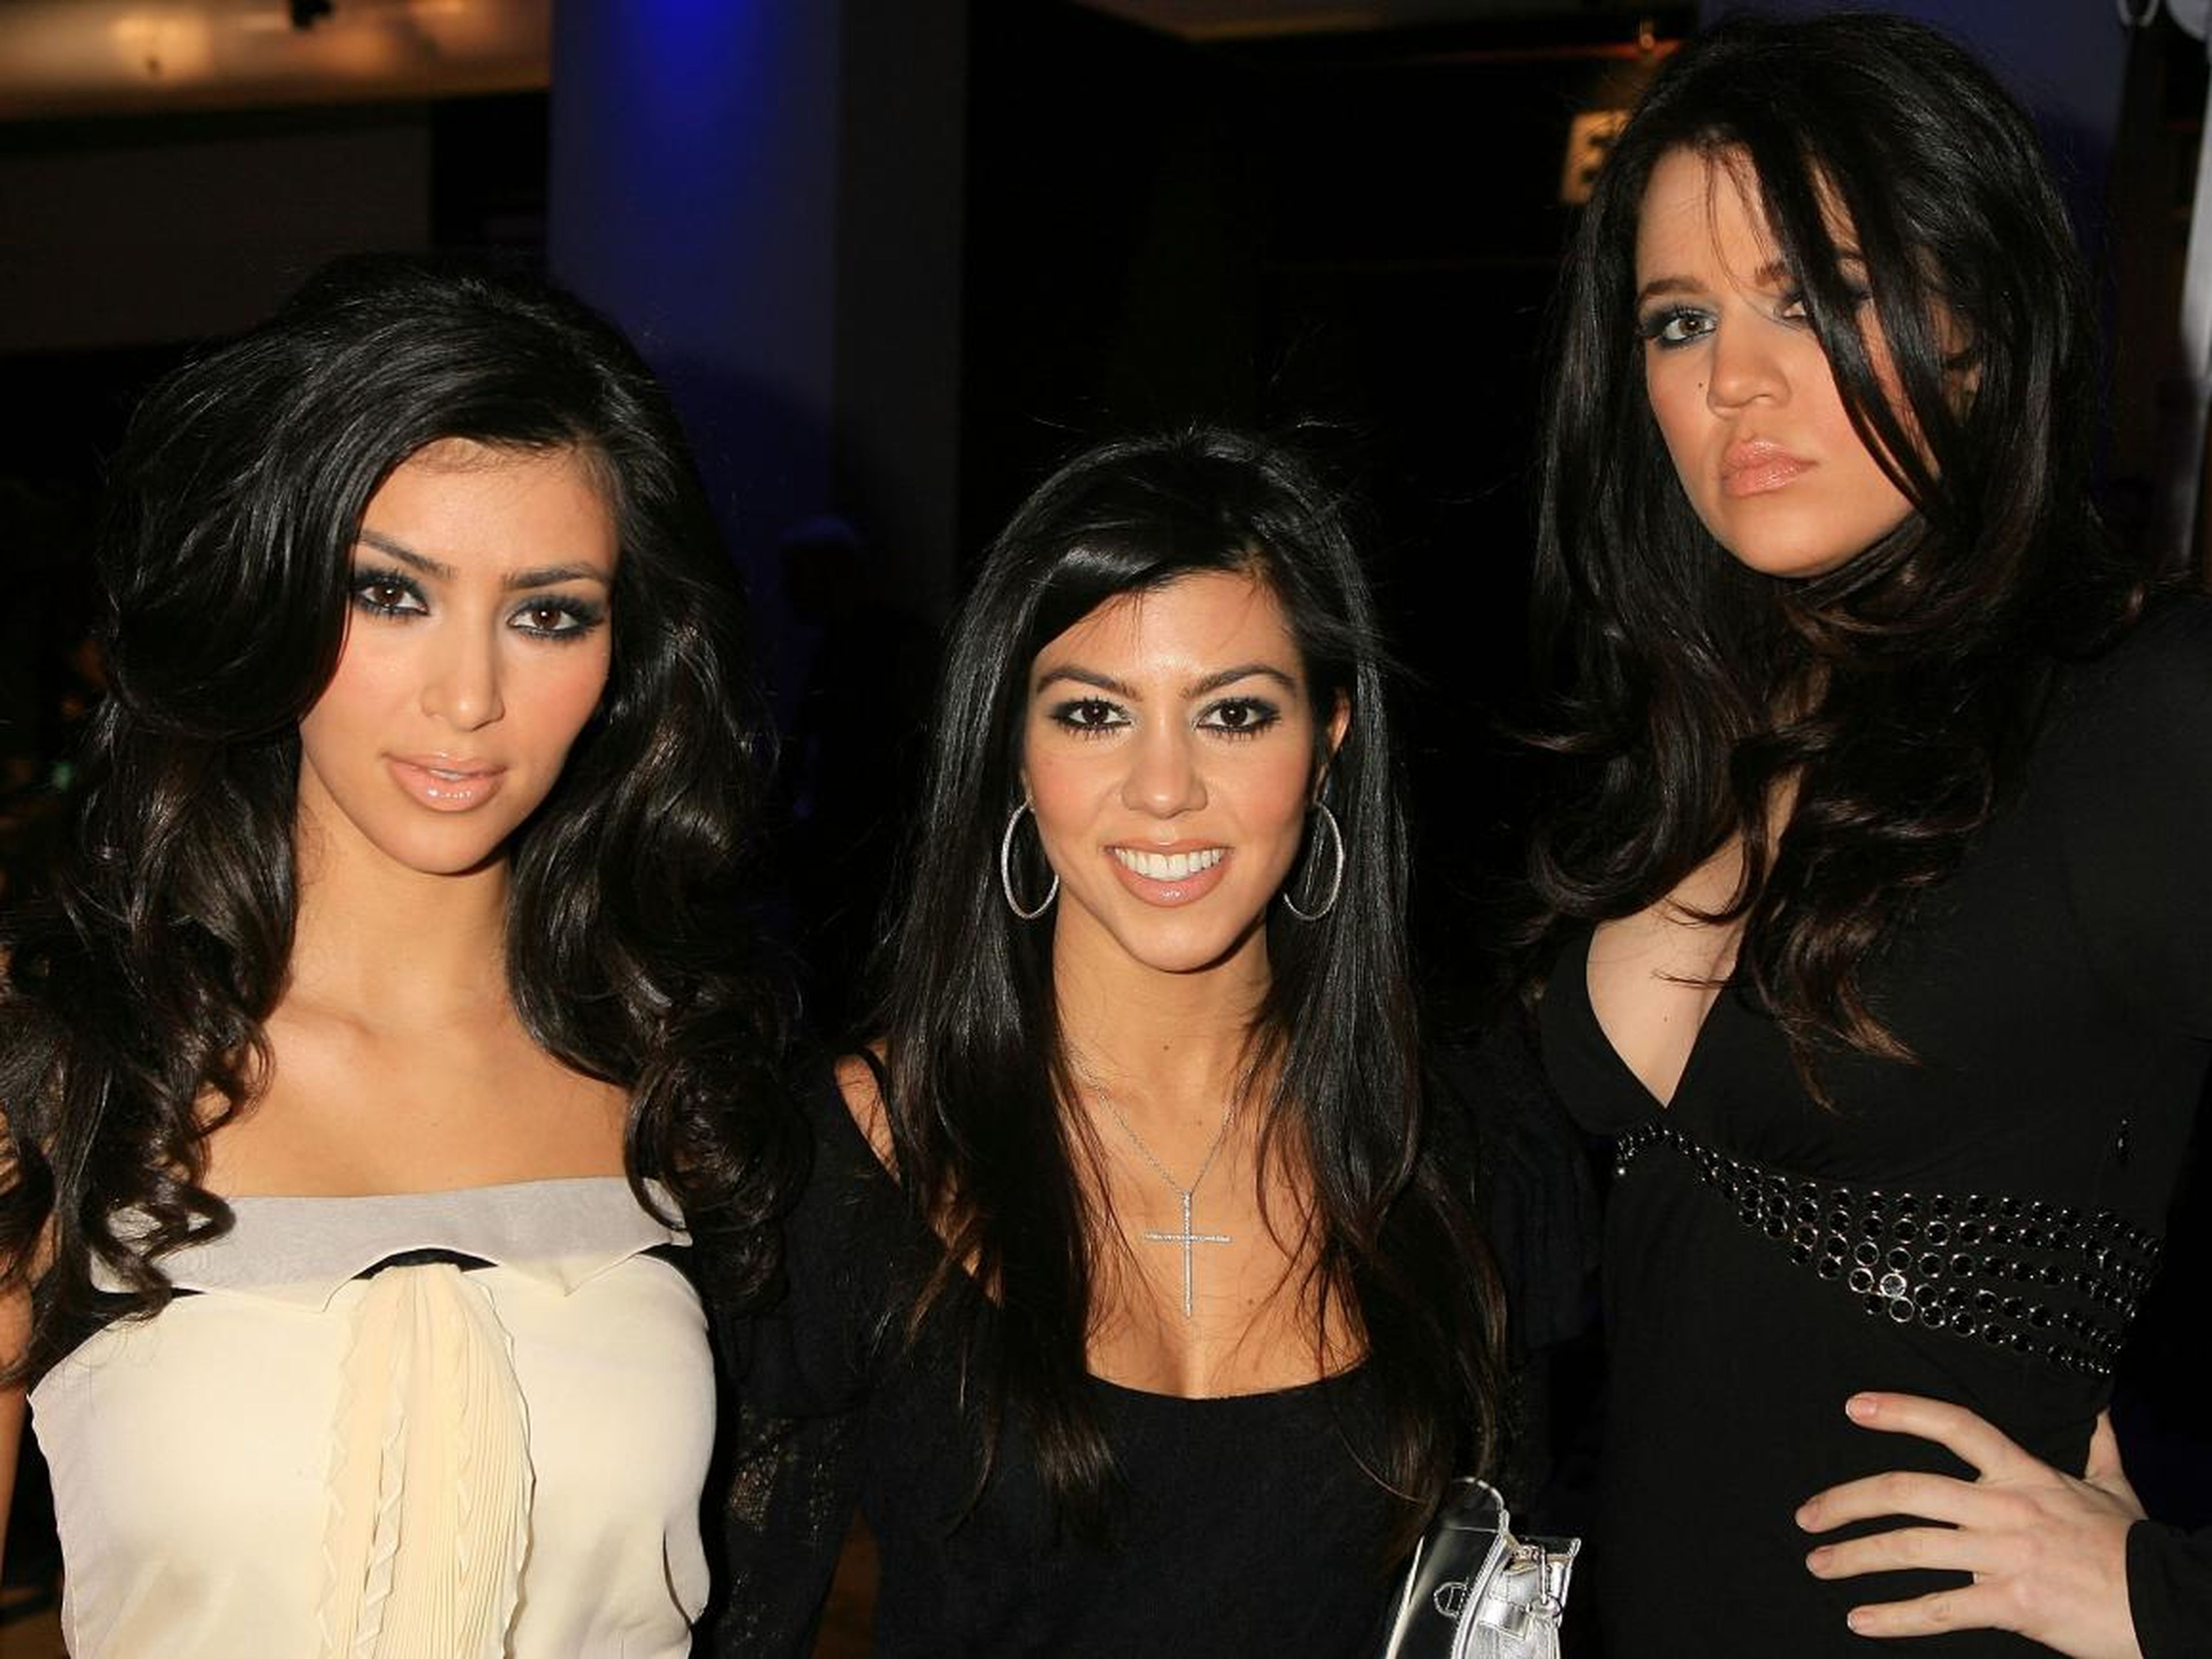 The name was changed to Kardashian Beauty after another established makeup company called Kroma Beauty took the sisters and their lawyers to court. This came after Khroma was threatened with a different lawsuit from LA-based